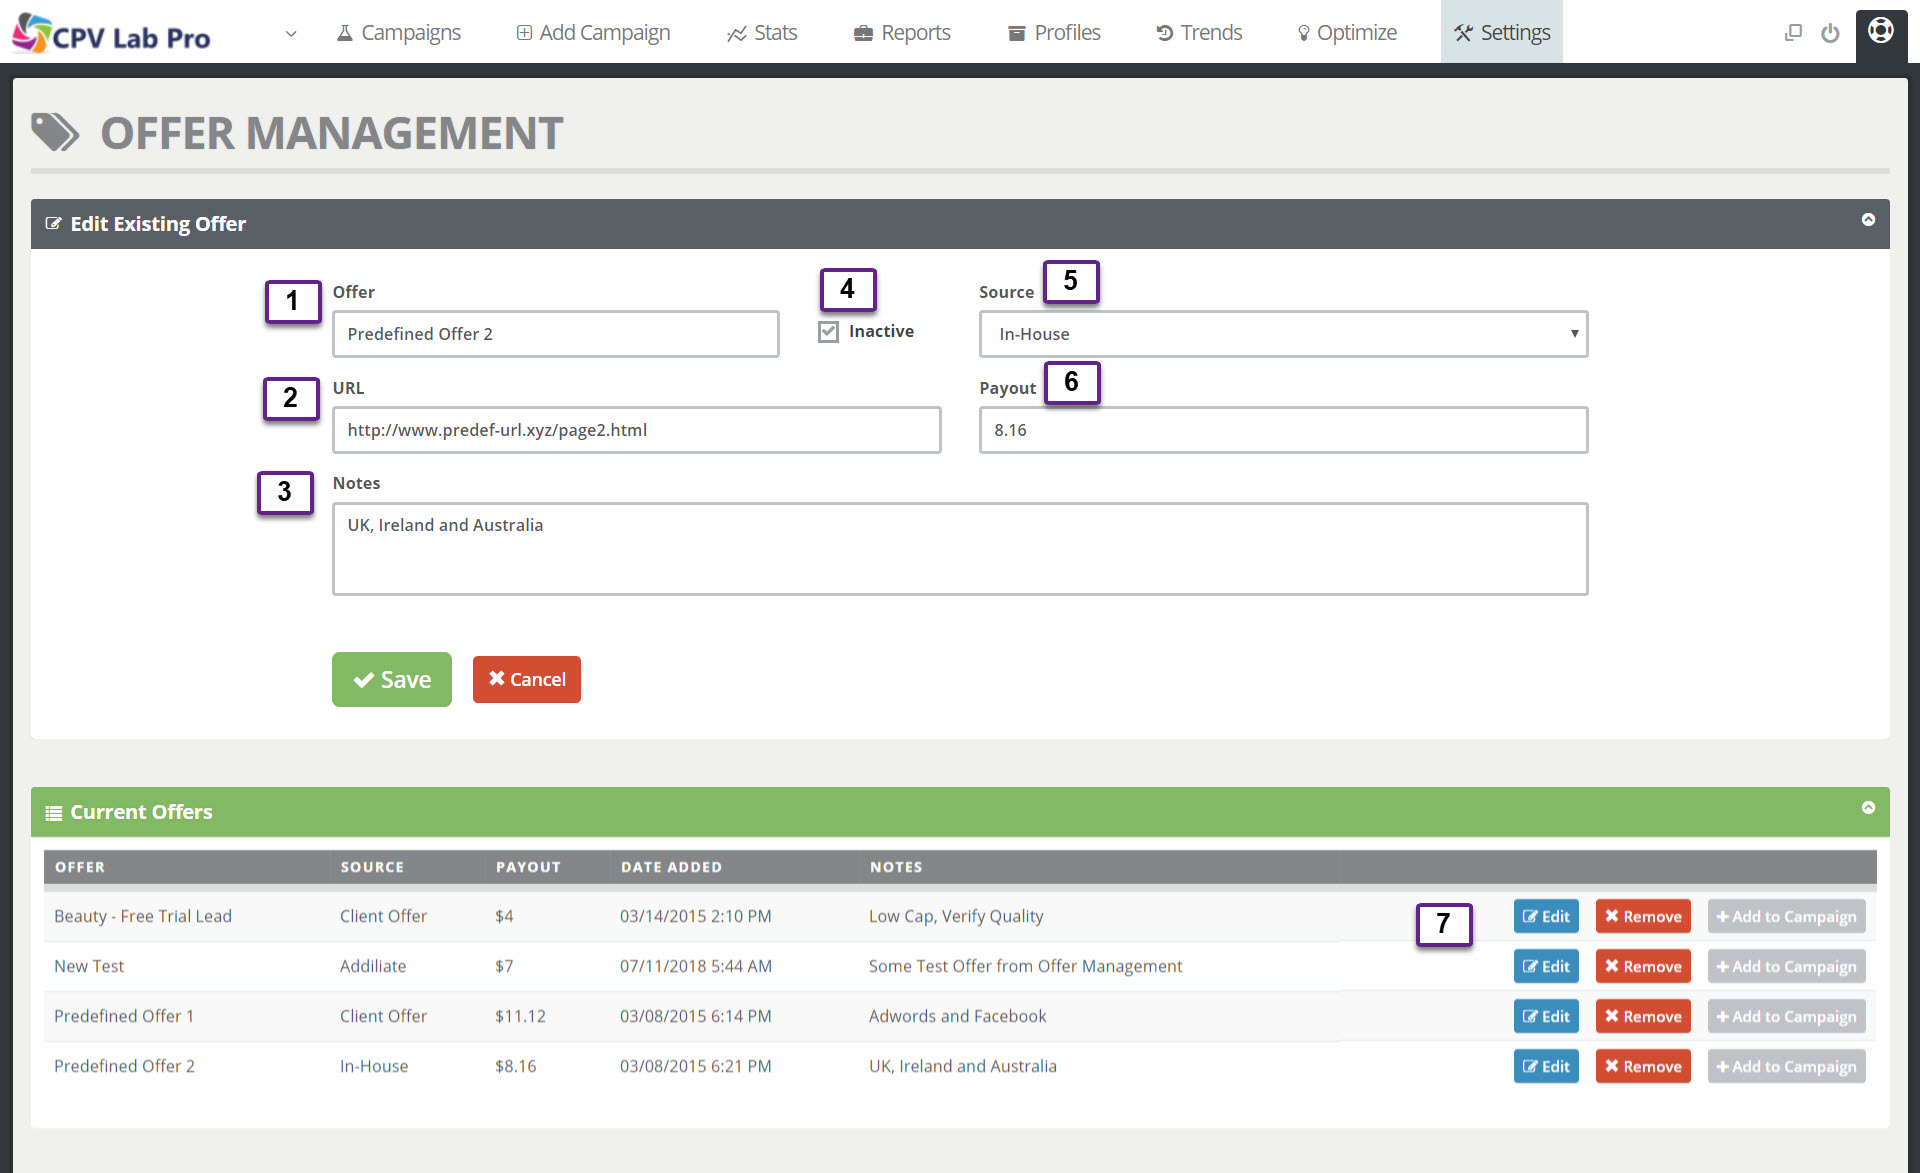 Offer Management Page